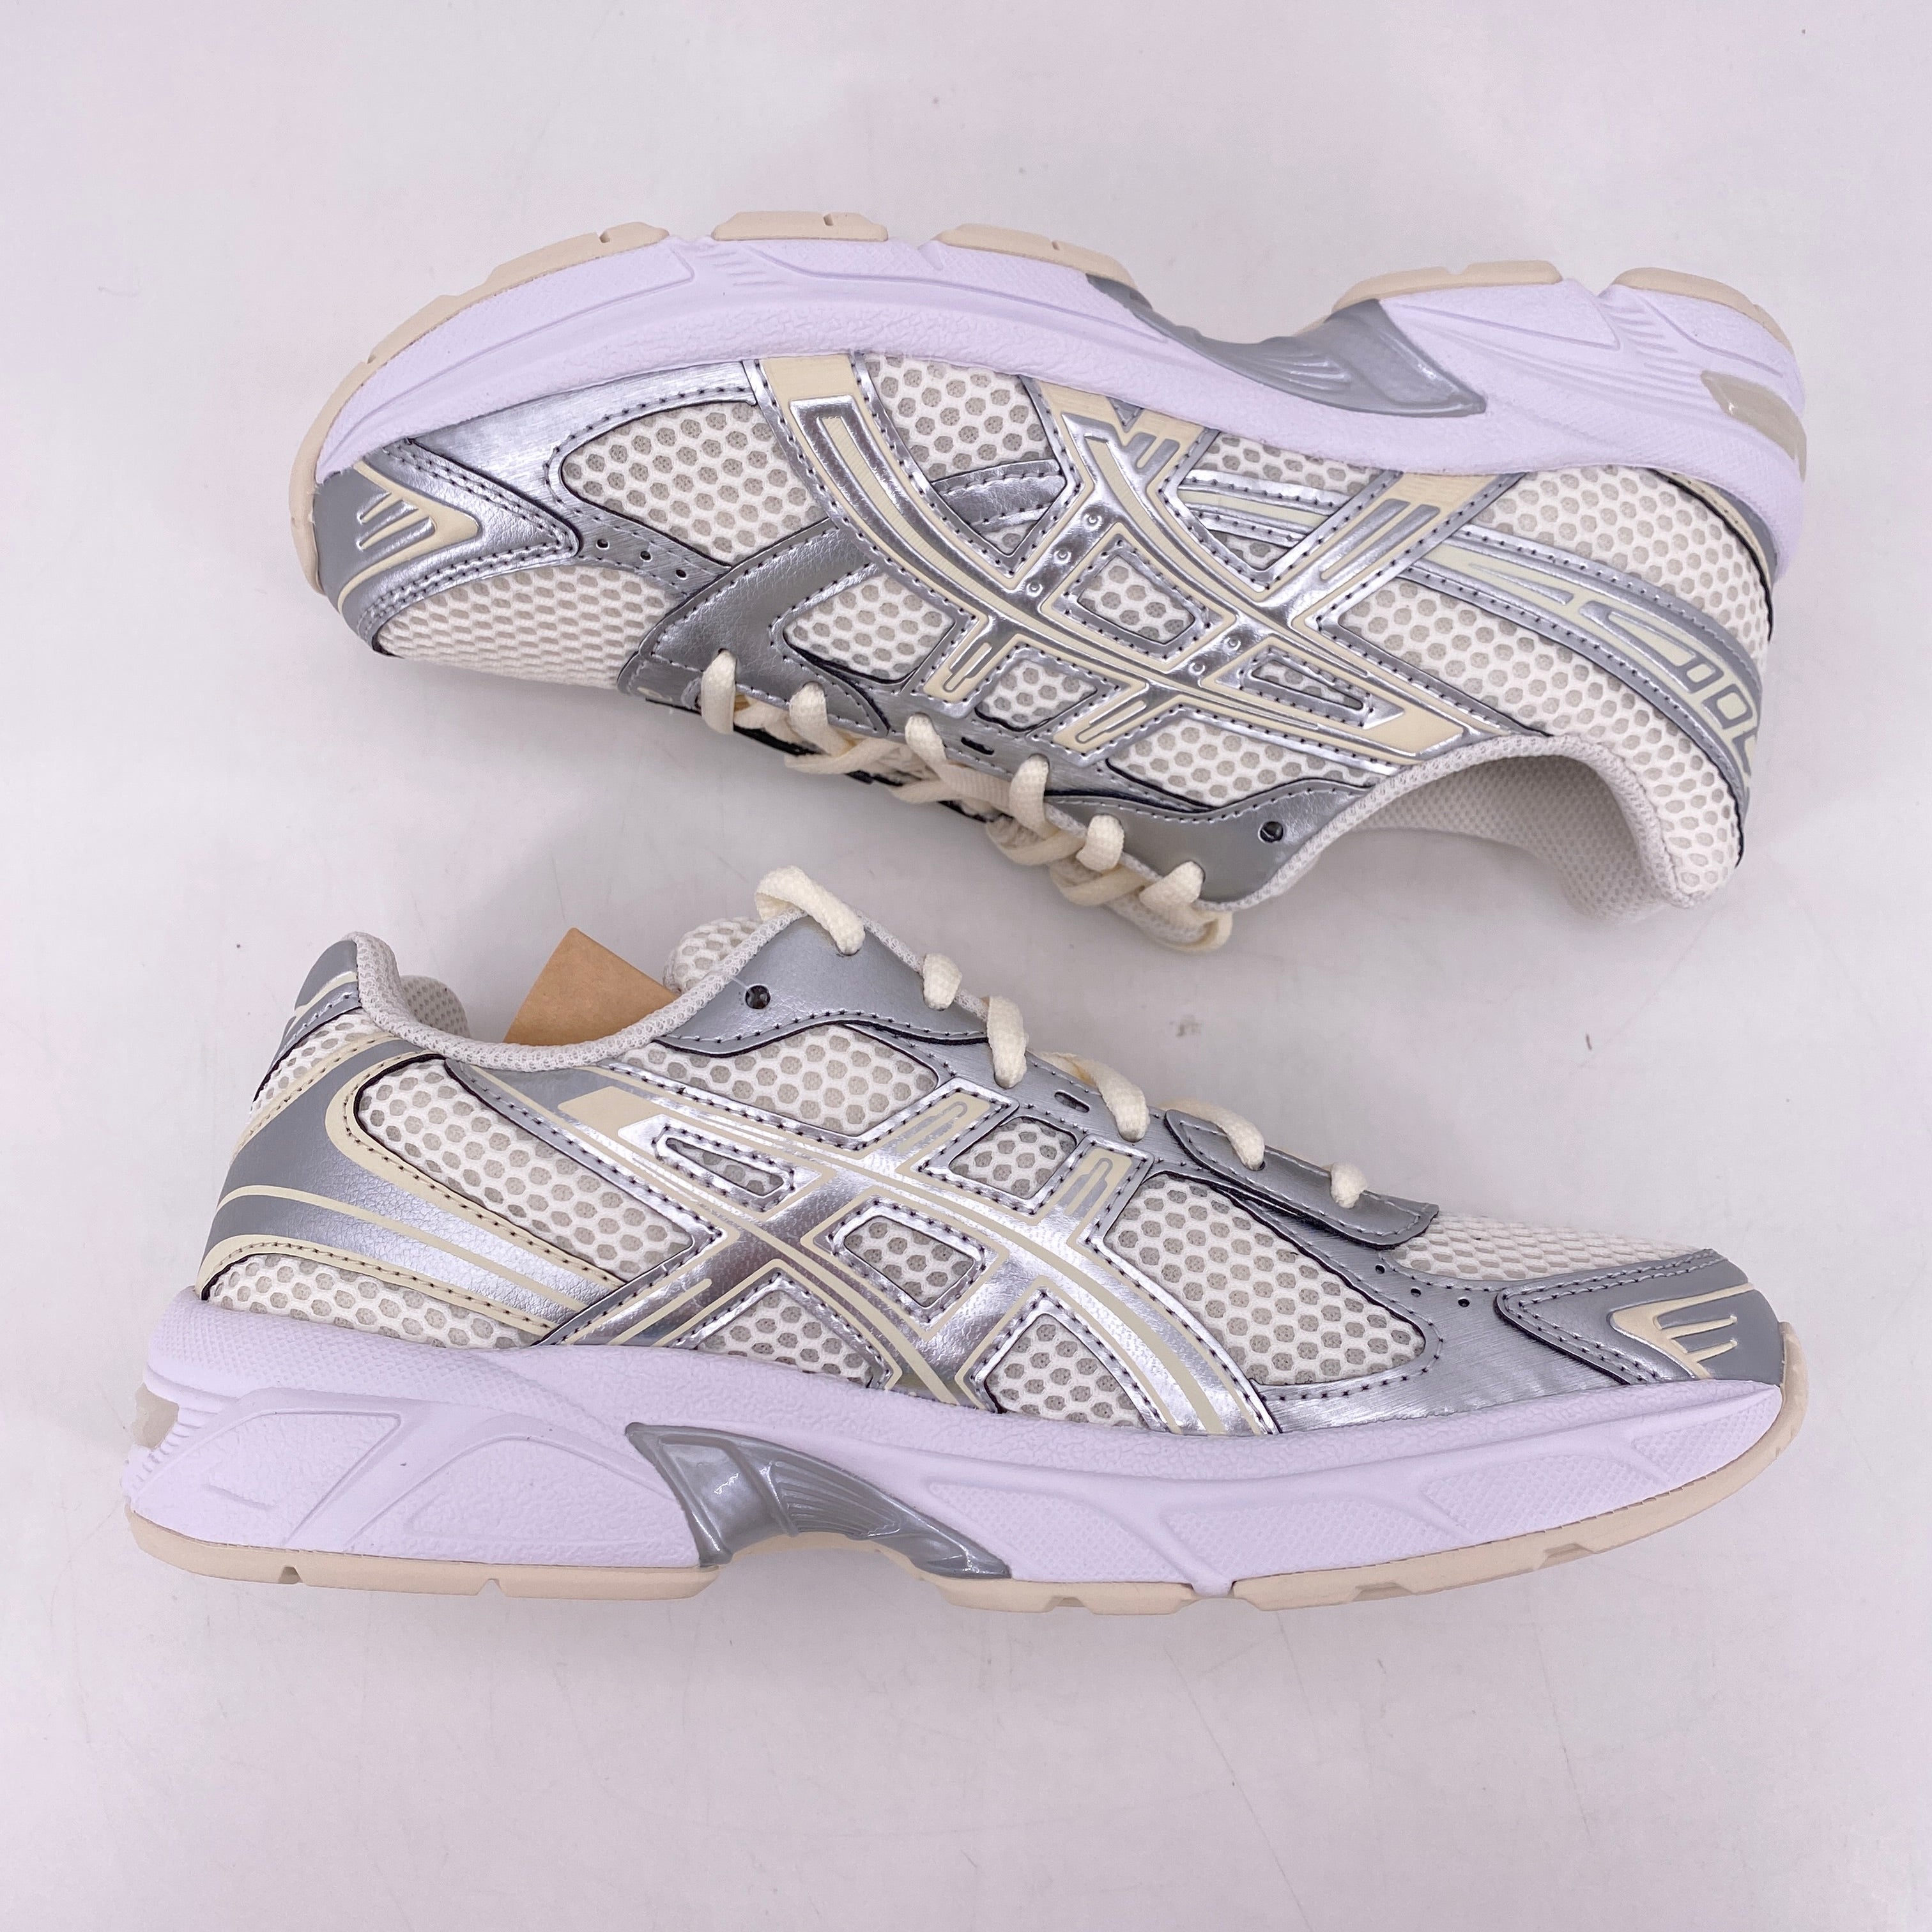 Asics (W) Gel-1130 &quot;Cream Pure Silver&quot; 2021 New Size 6.5W